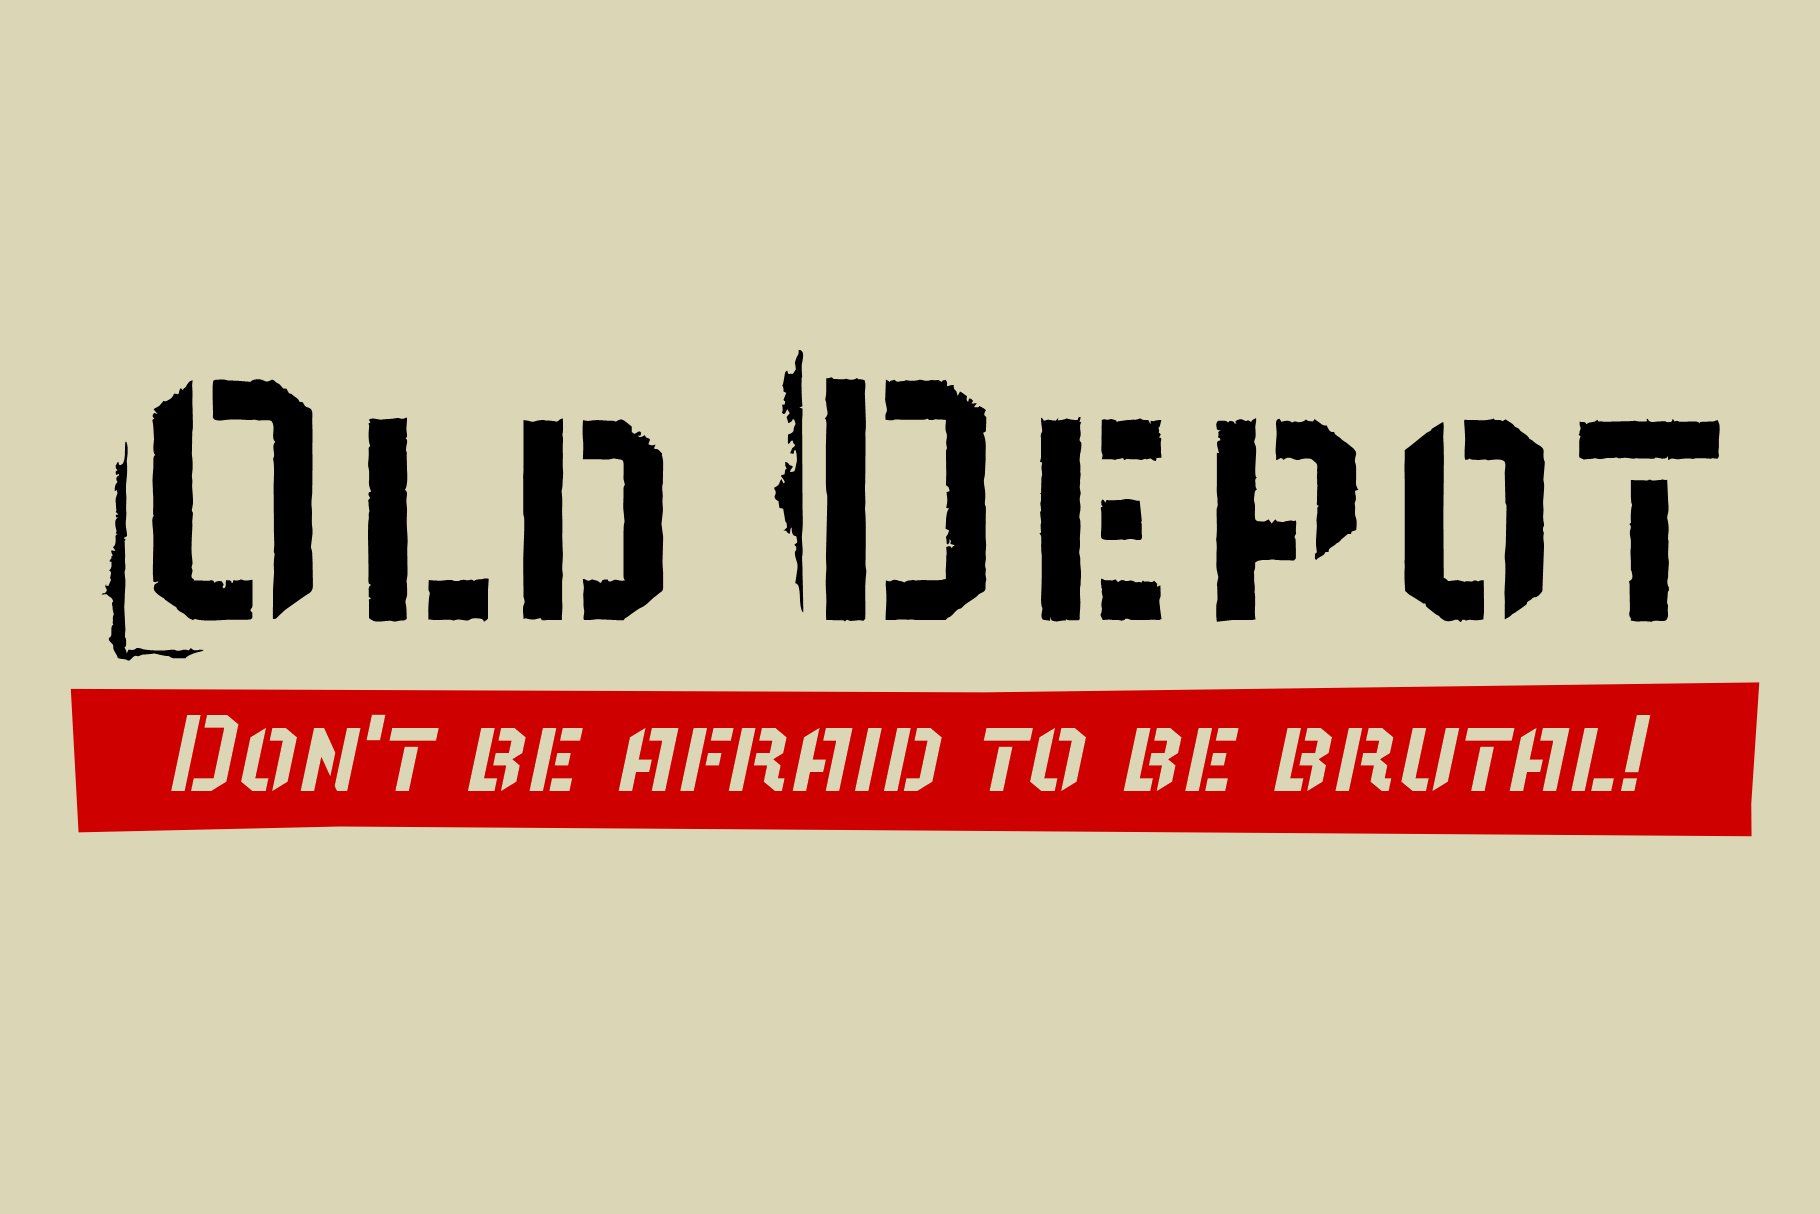 Old Depot cover image.